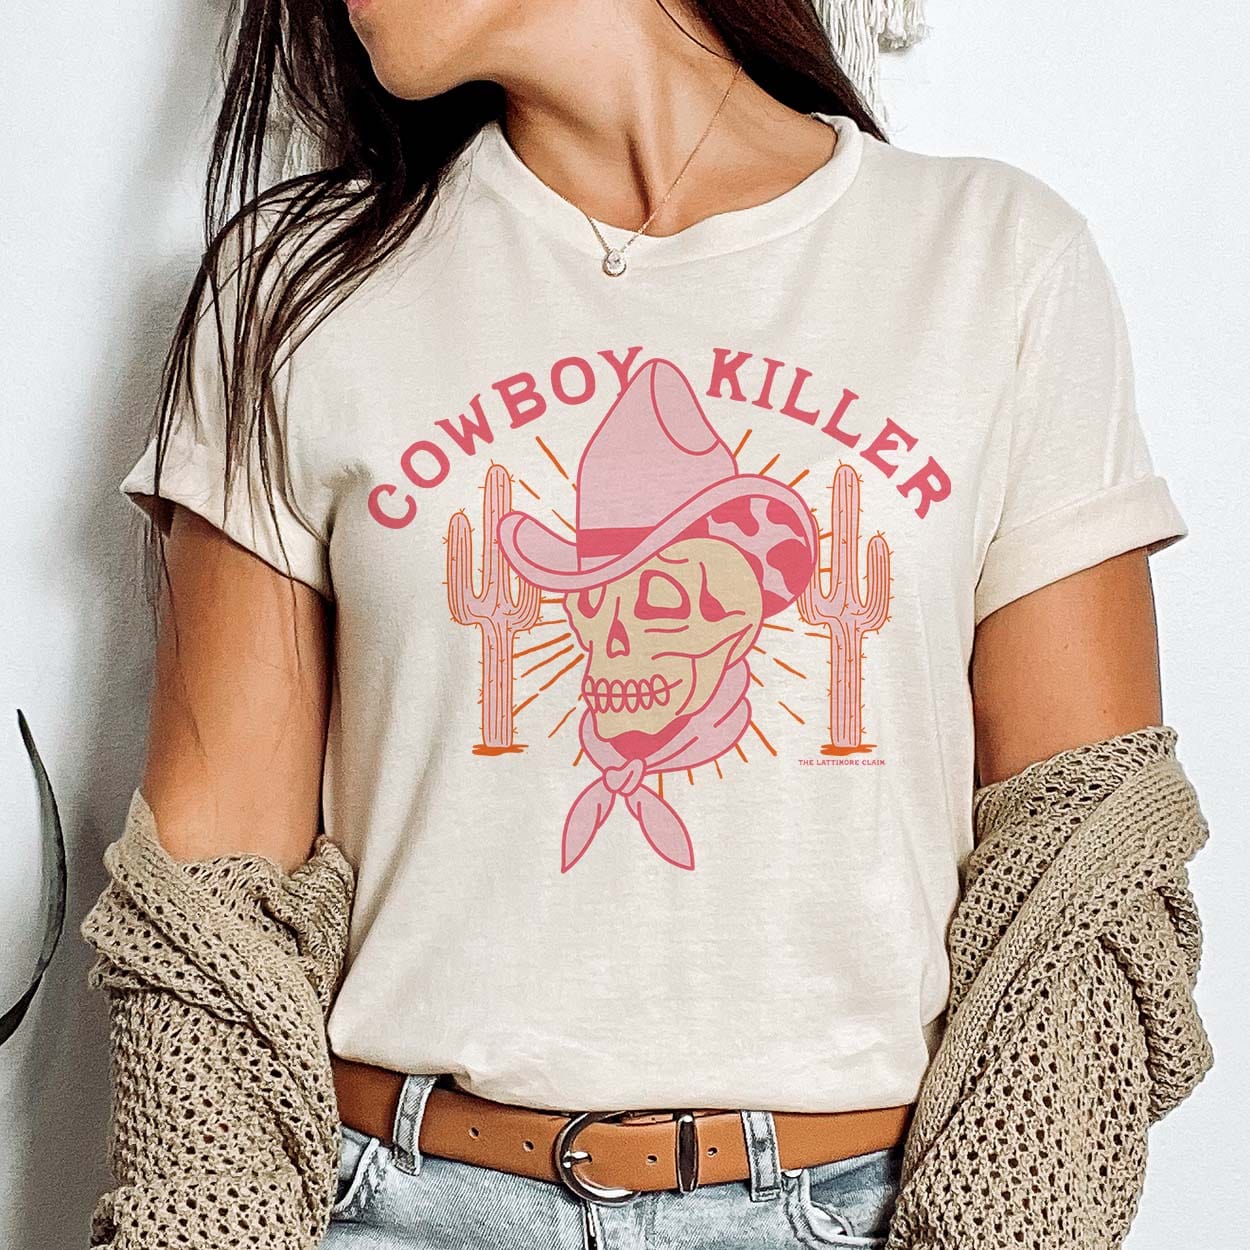 A cream colored short sleeve shirt with cuffed sleeves featuring a graphic of a pink skull with a cowboy hat and bandana and cacti on either side with rays coming out behind the skull. The text "cowboy killer" is in pink above the graphic. Item is pictured on a plain white background.